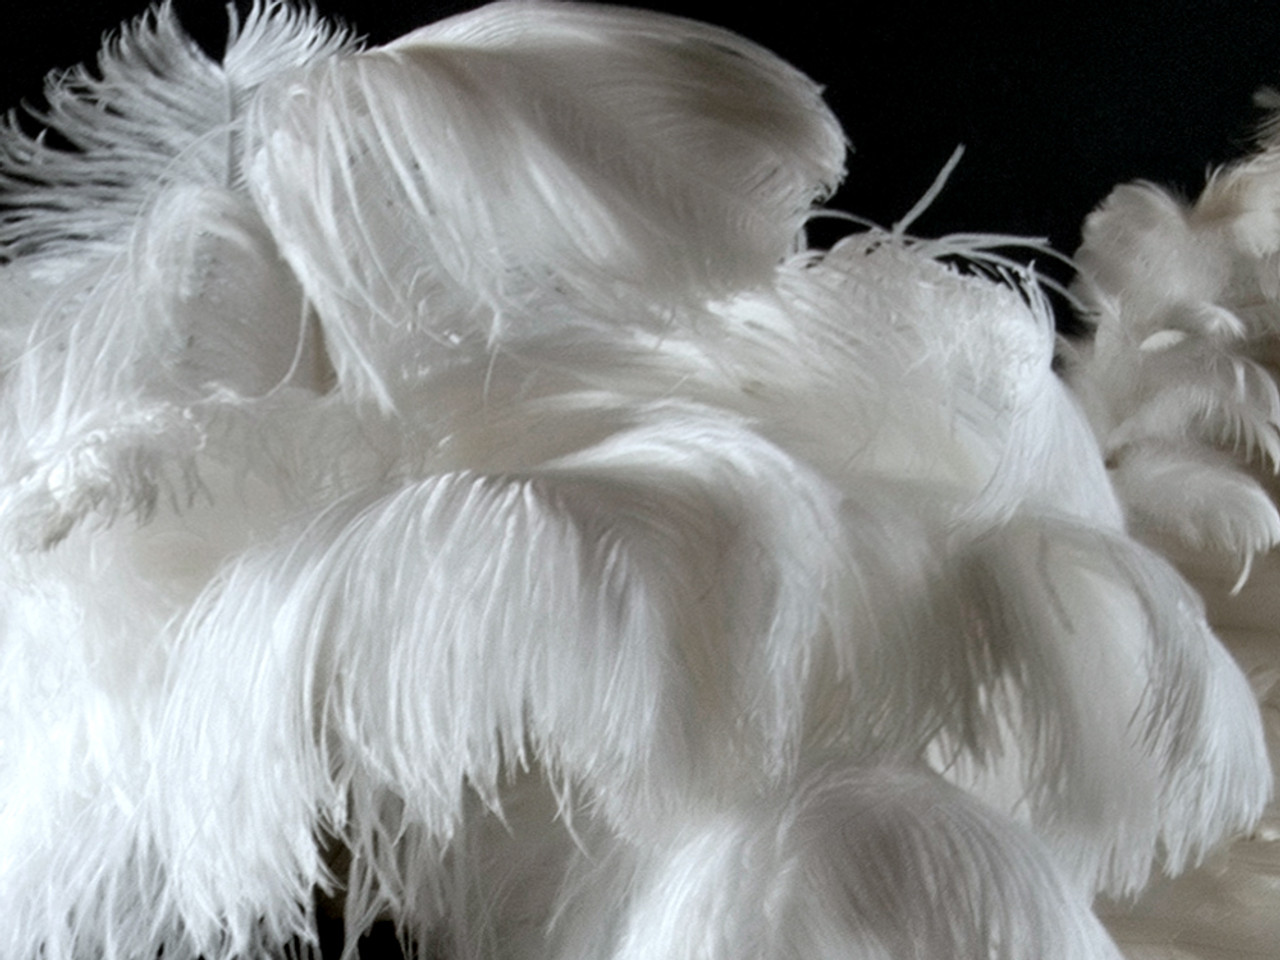 12 RARE 24-26 Ostrich Plume Feathers - White